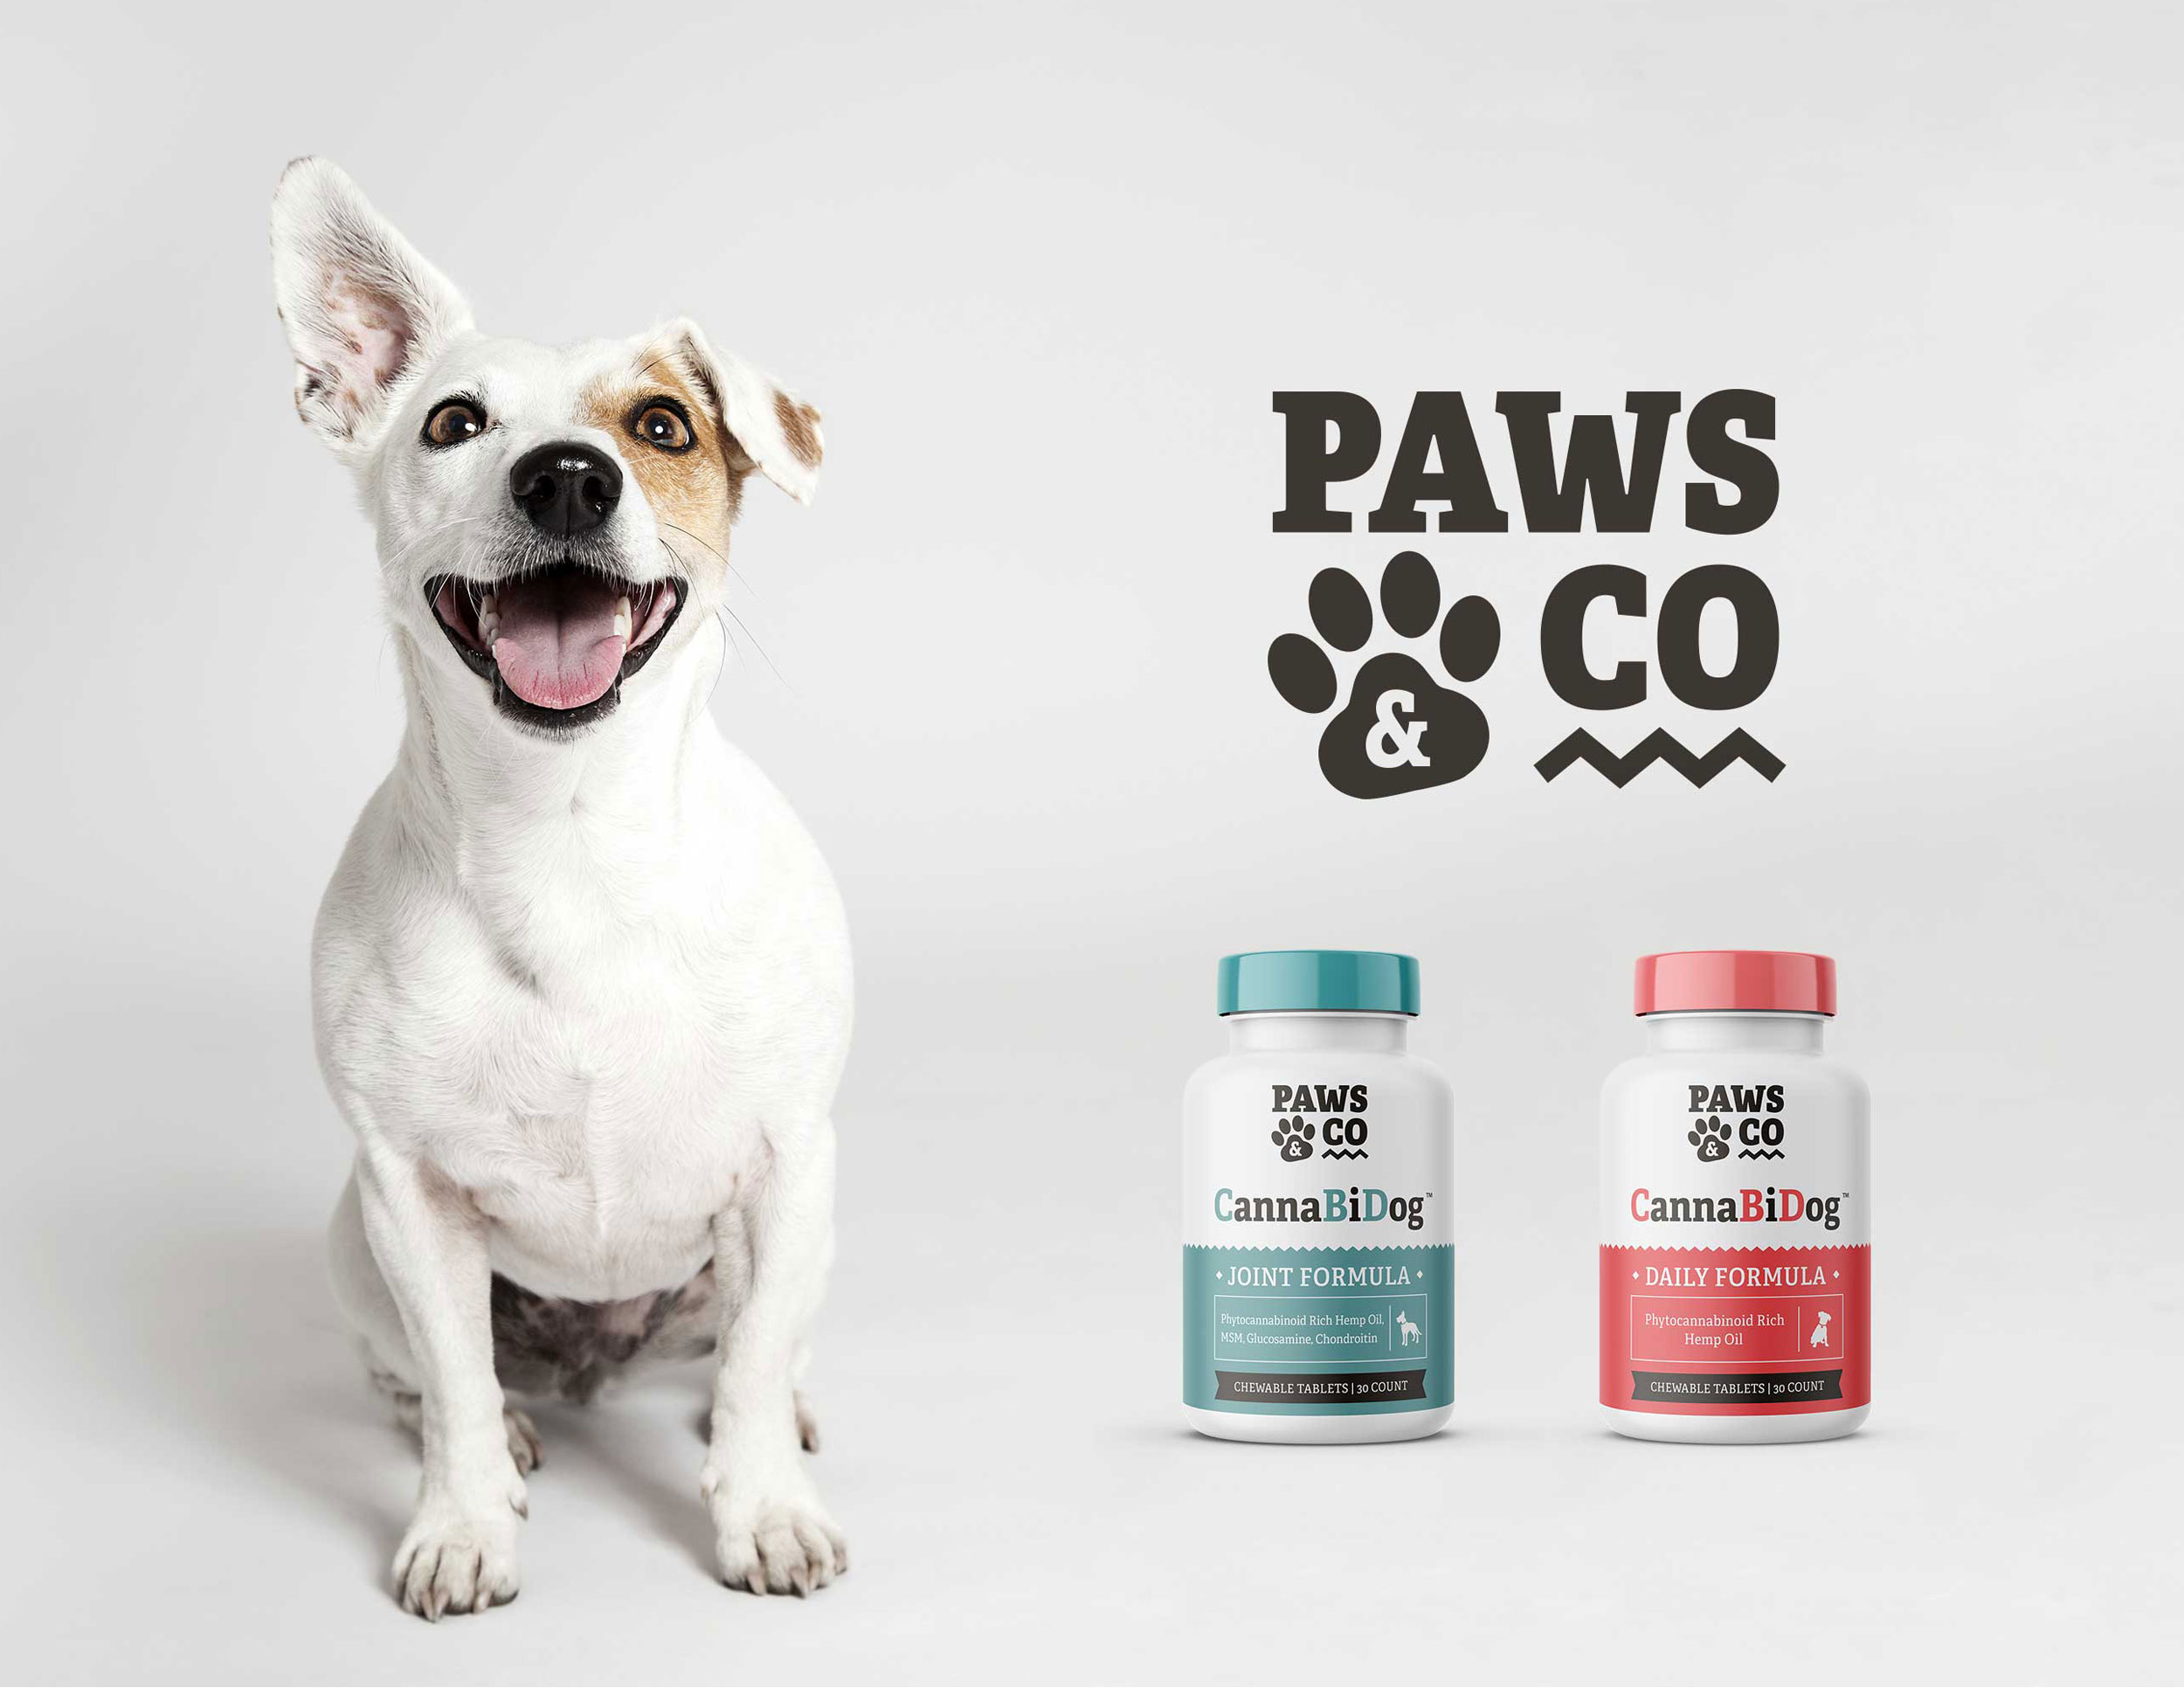 Paws & Co Packaging